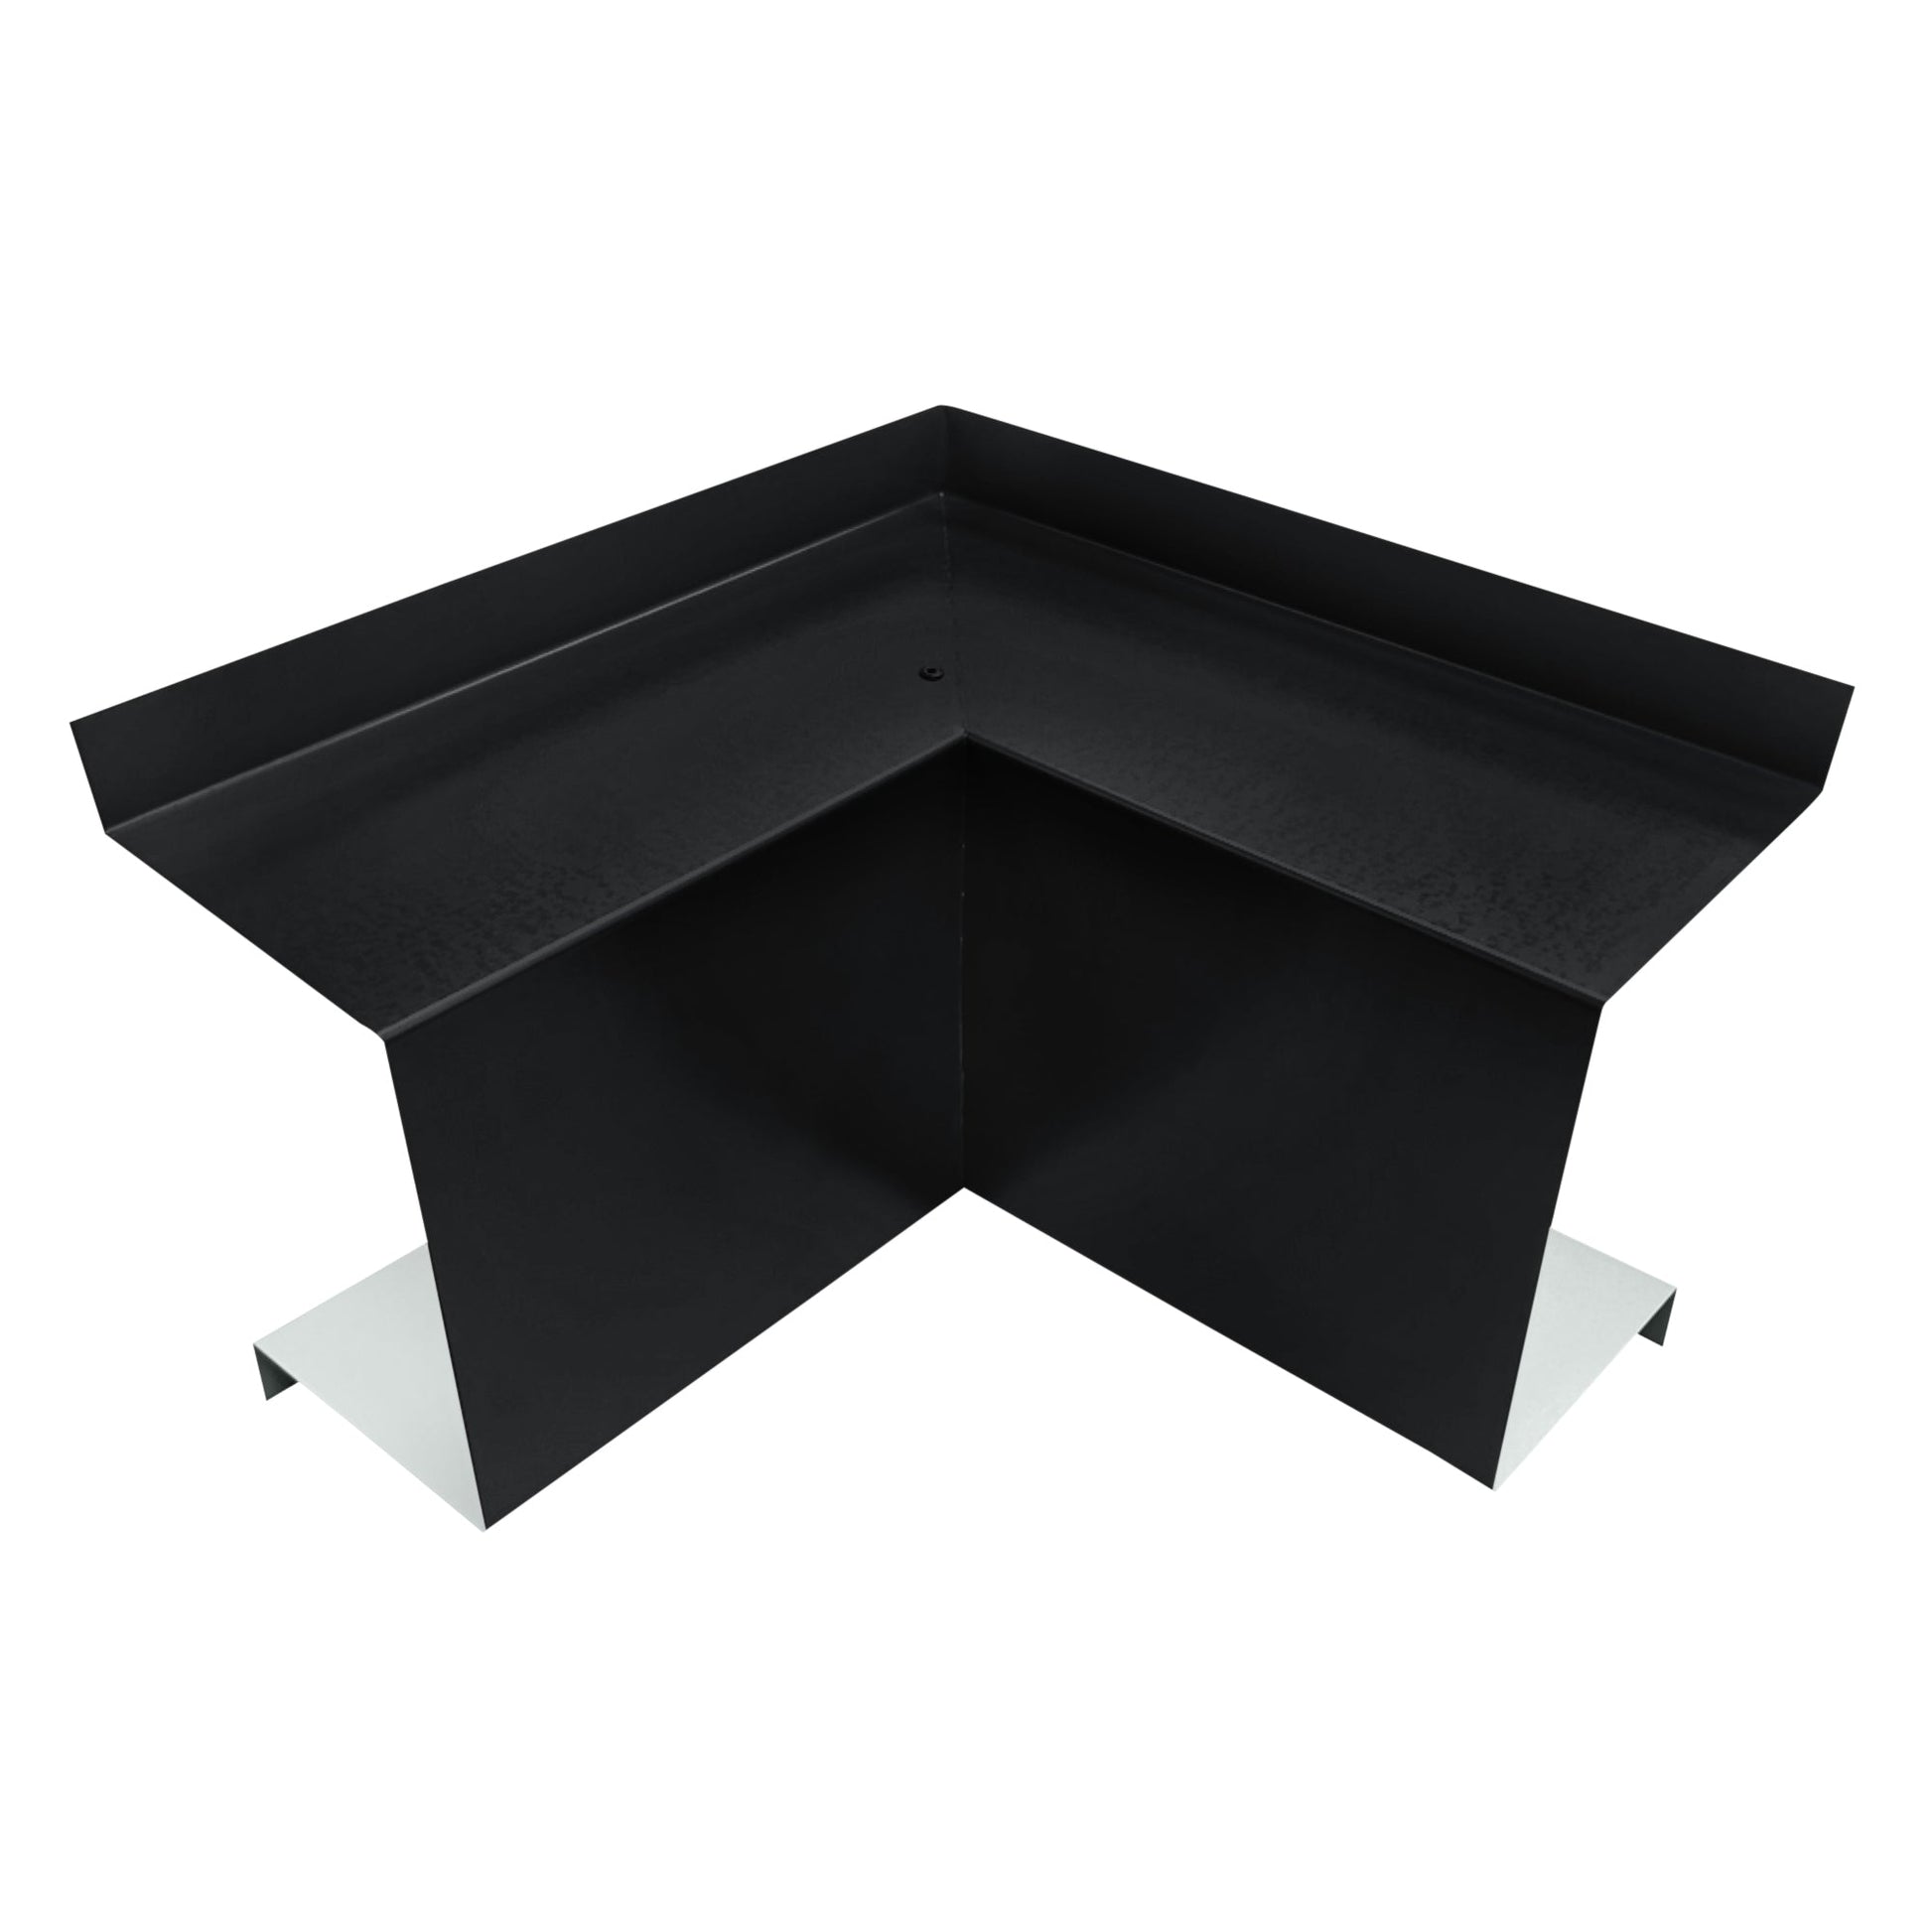 A black, L-shaped metal bracket with a flat base. The bracket has vertical and horizontal components, forming a right angle. Ideal for HVAC installations, it is shown isolated on a white background.

Replaced sentence:
A black Perma Cover Residential Series - Line Set Cover Inside Corner Elbows - Premium Quality with a flat base. The cover has vertical and horizontal components, forming a right angle. Ideal for HVAC installations, it is shown isolated on a white background.